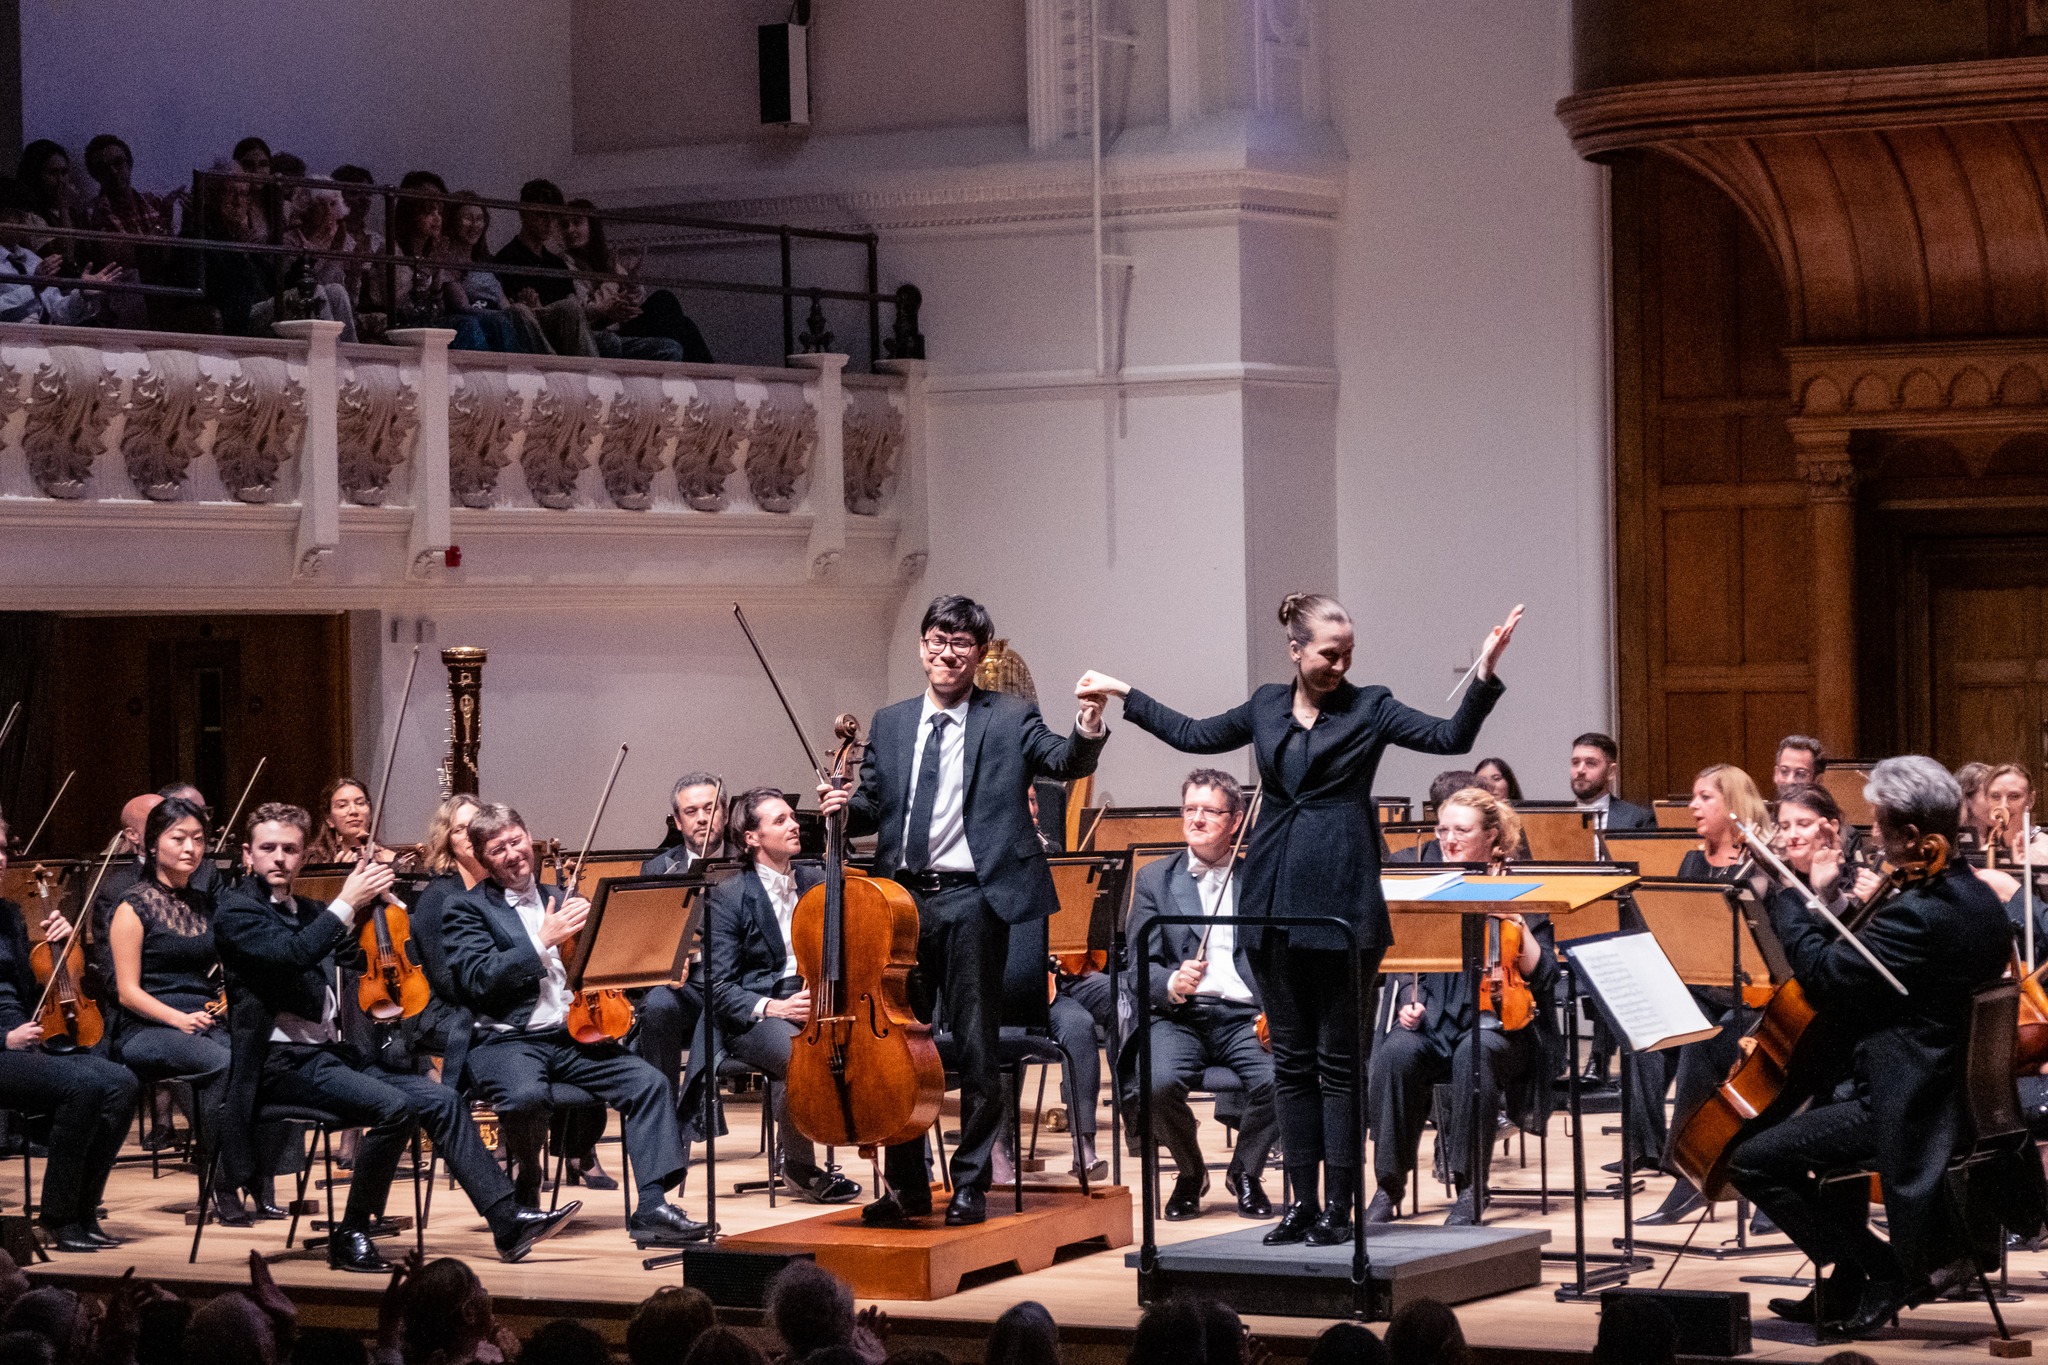 Cellist Zlatomir Fung and conductor Elena Schwarz receiving applause on stage at Cadogan Hall